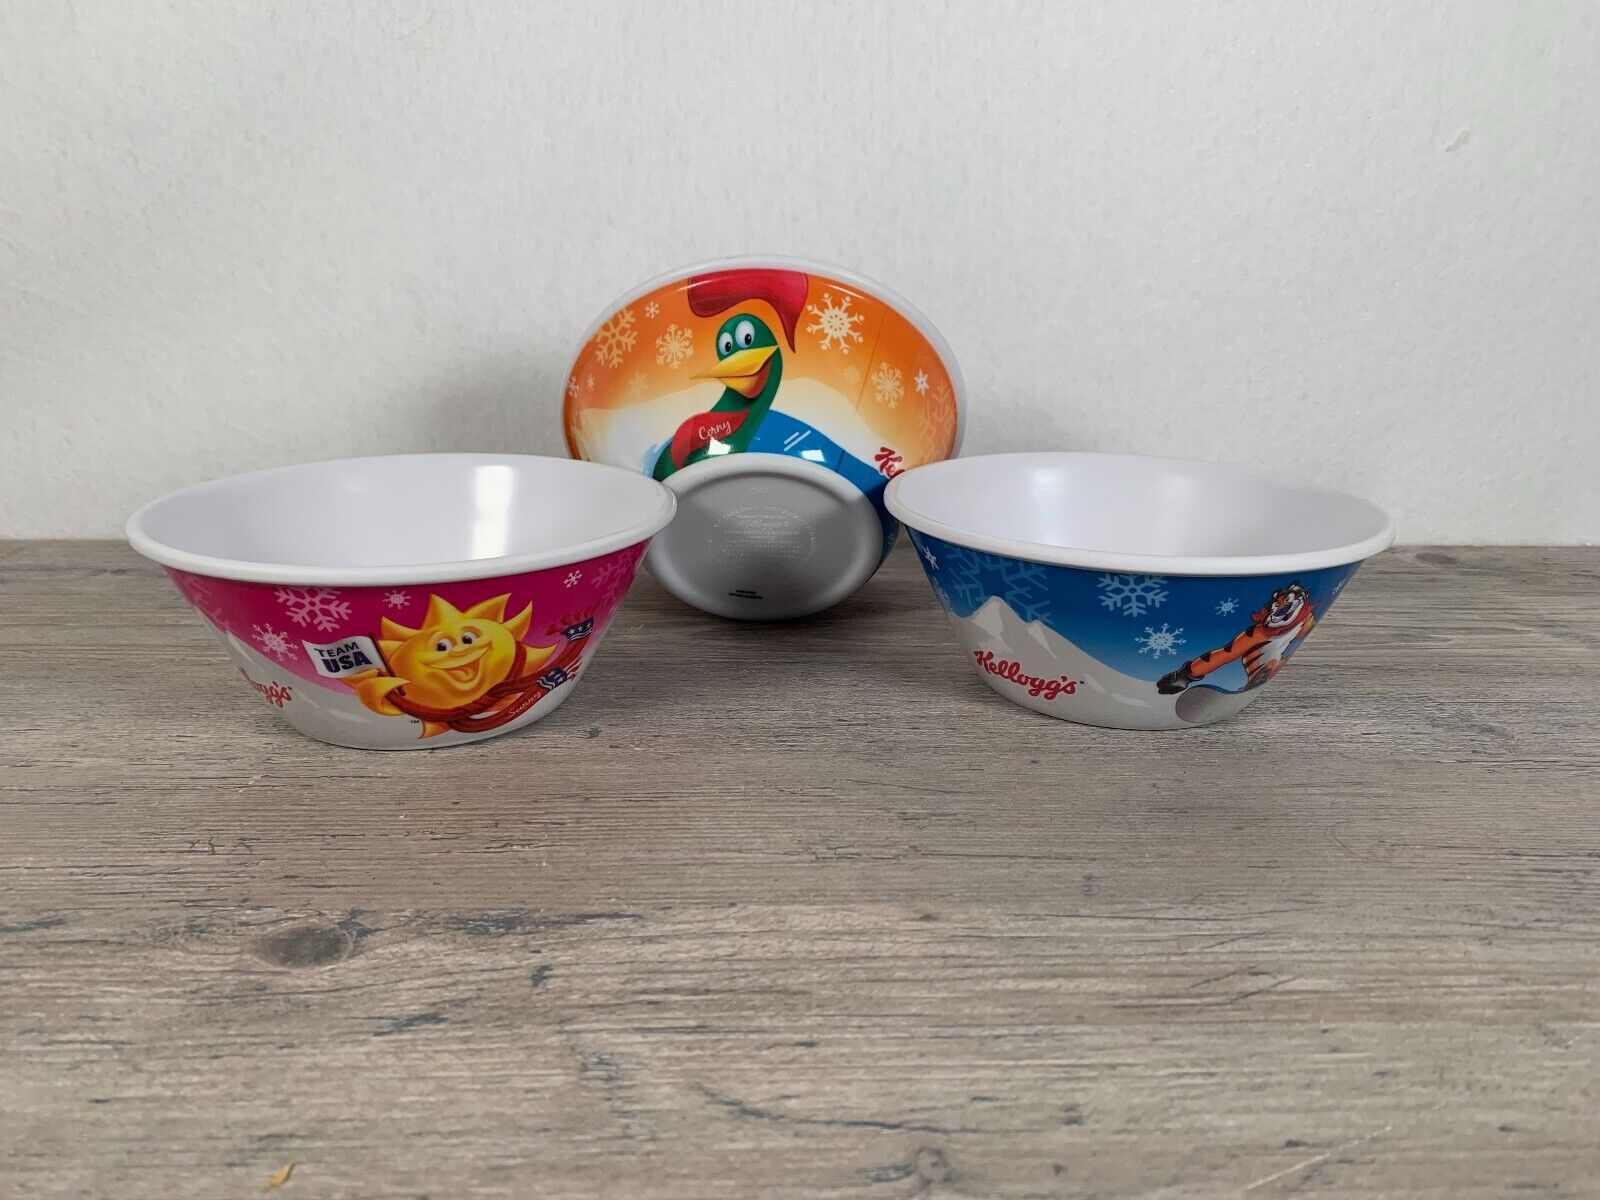 Kellogg's 2014 Olympics 3 Pre Owned Cereal Bowls